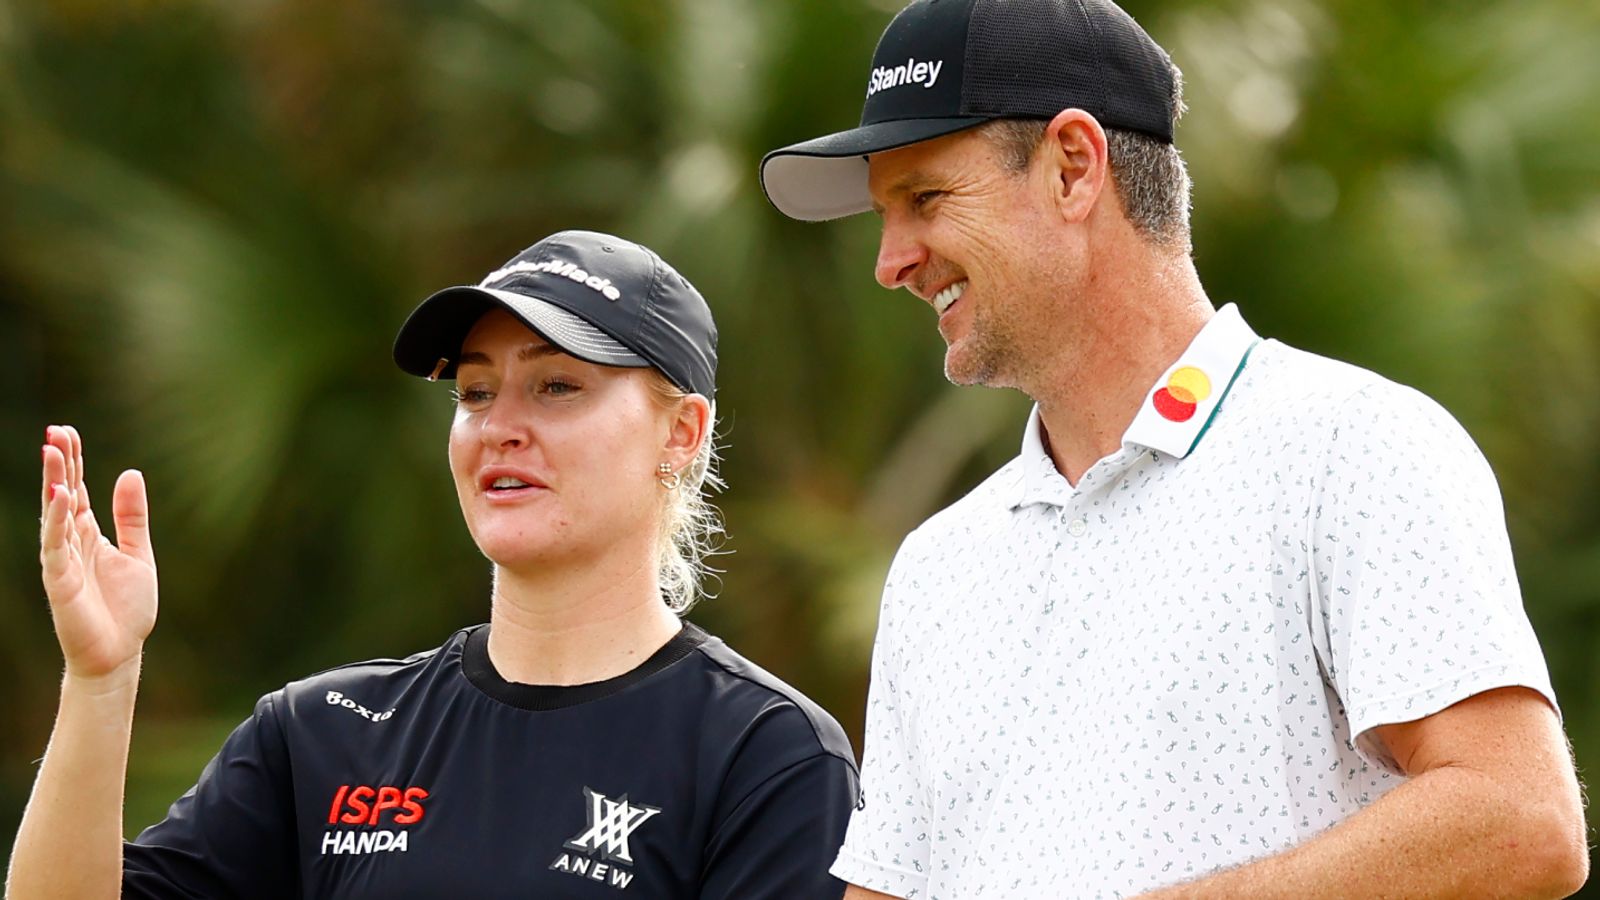 Grant Thornton Invitational Charley Hull and Justin Rose two behind leaders Nelly Korda and